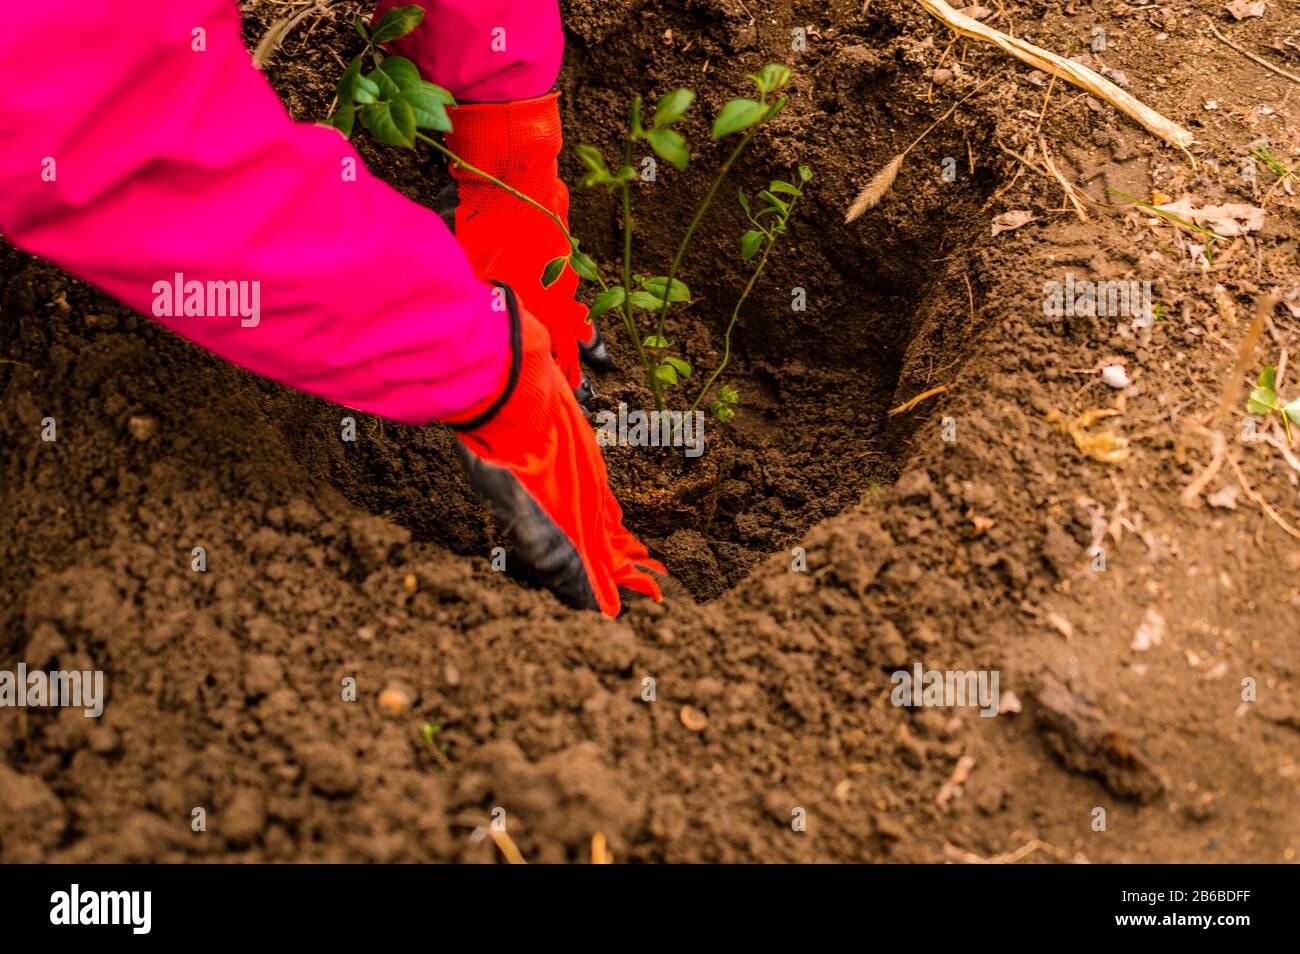 Young woman's hands planting  bilberry tree in the garden - stock photo Stock Photo